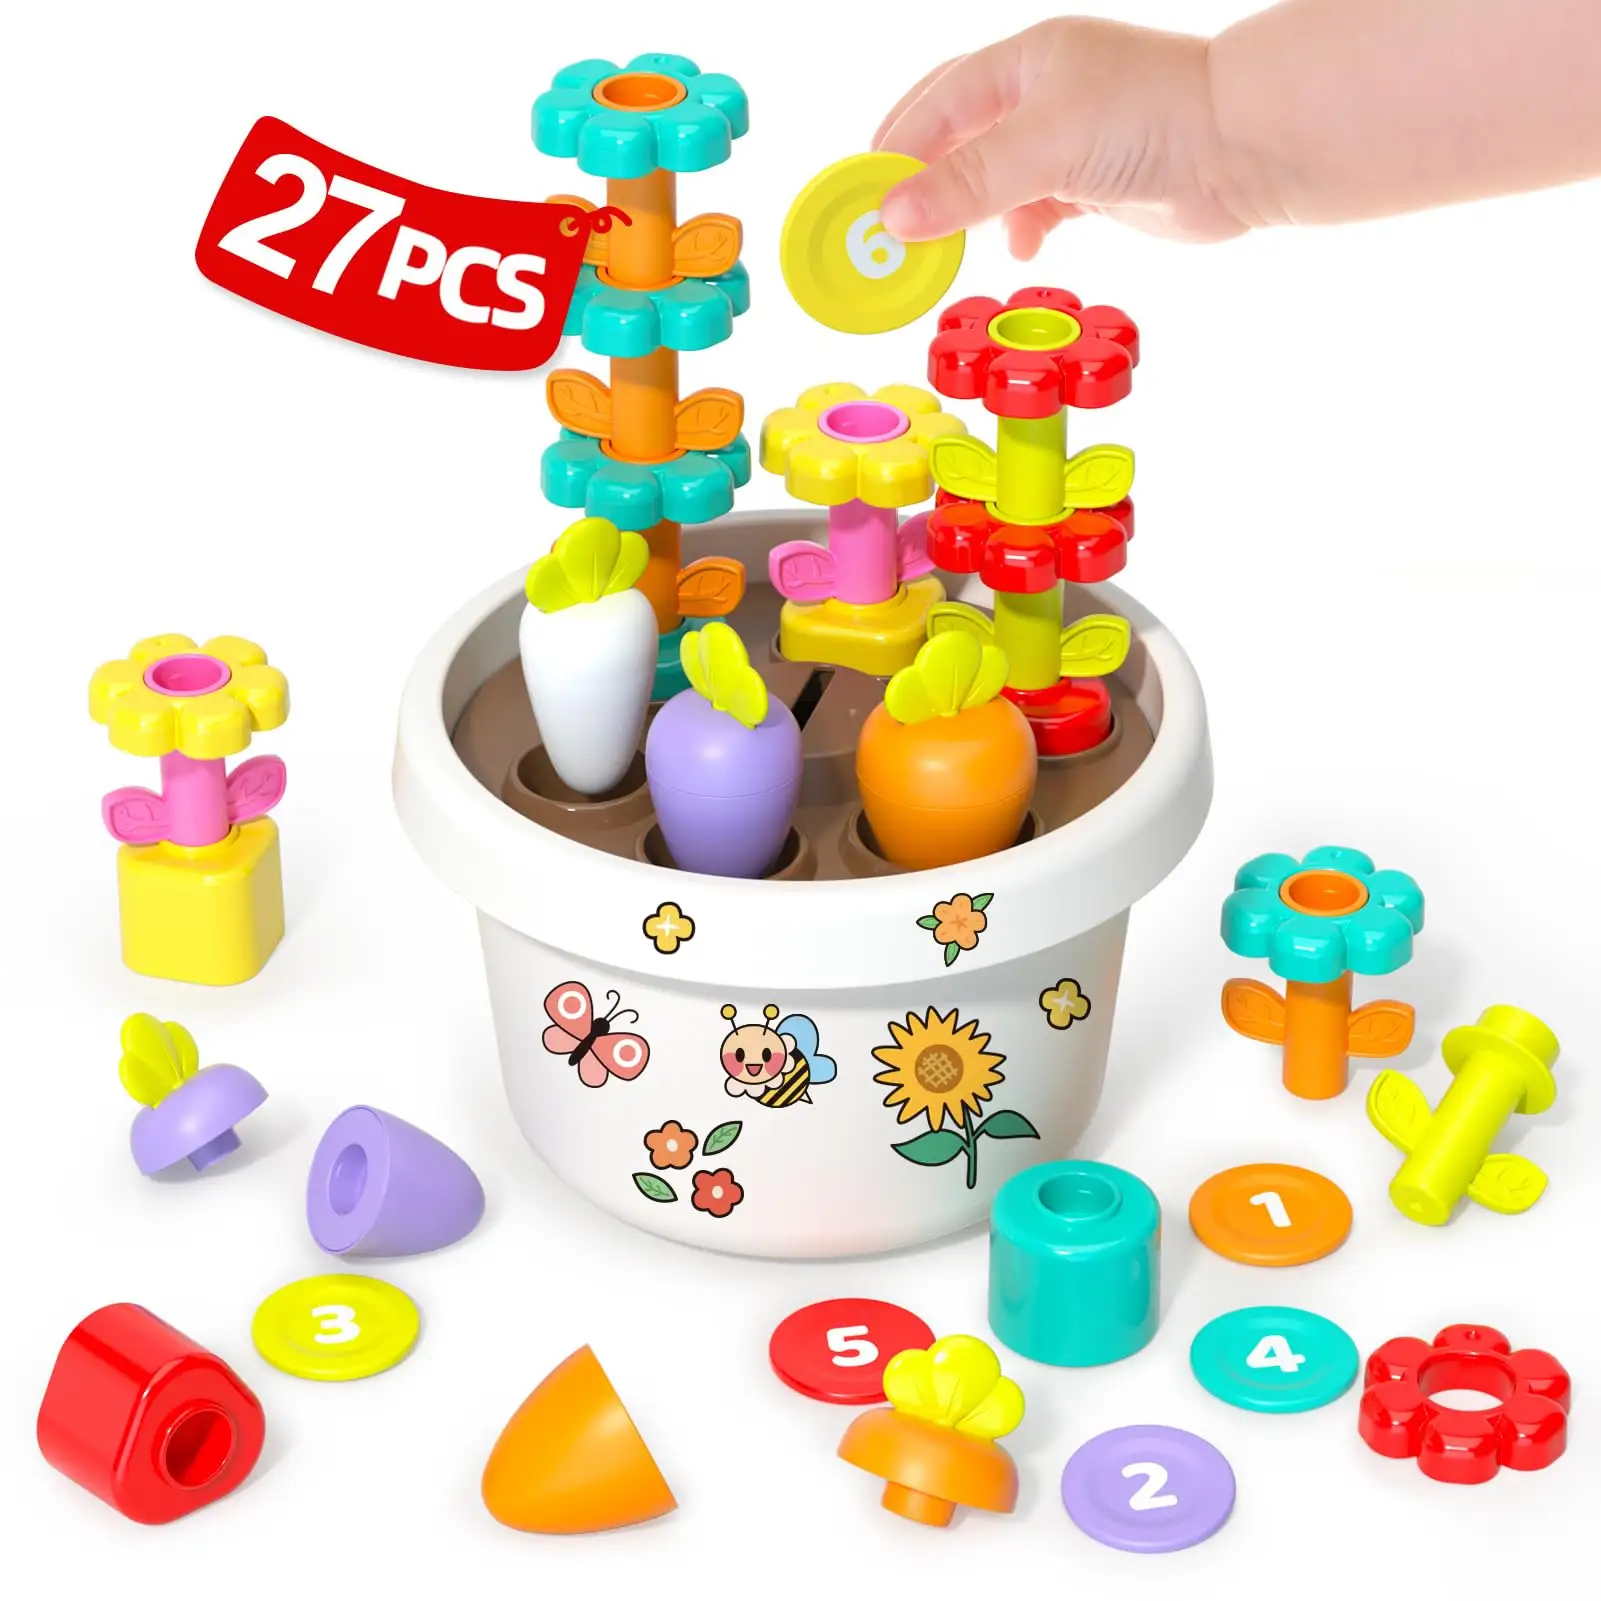 7-in-1 Montessori Learning Toys Set for 1 Year Old Girl - Endless Fun and Exploration